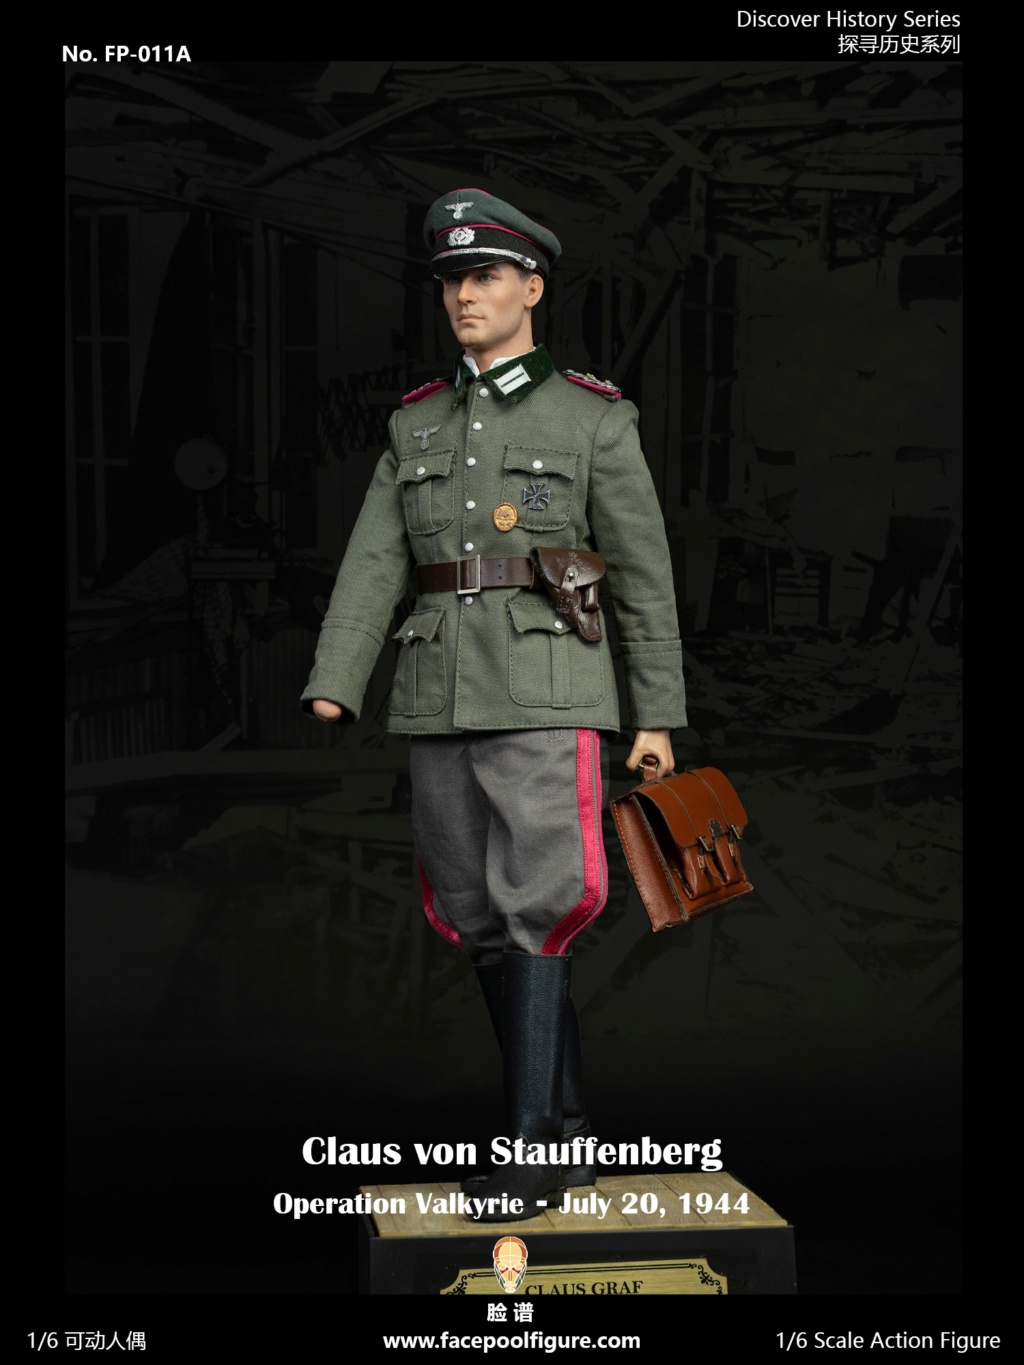 NEW PRODUCT: Facepool: 1/6 Exploring history series: Operation Valkyrie (accessories correction) 06465910